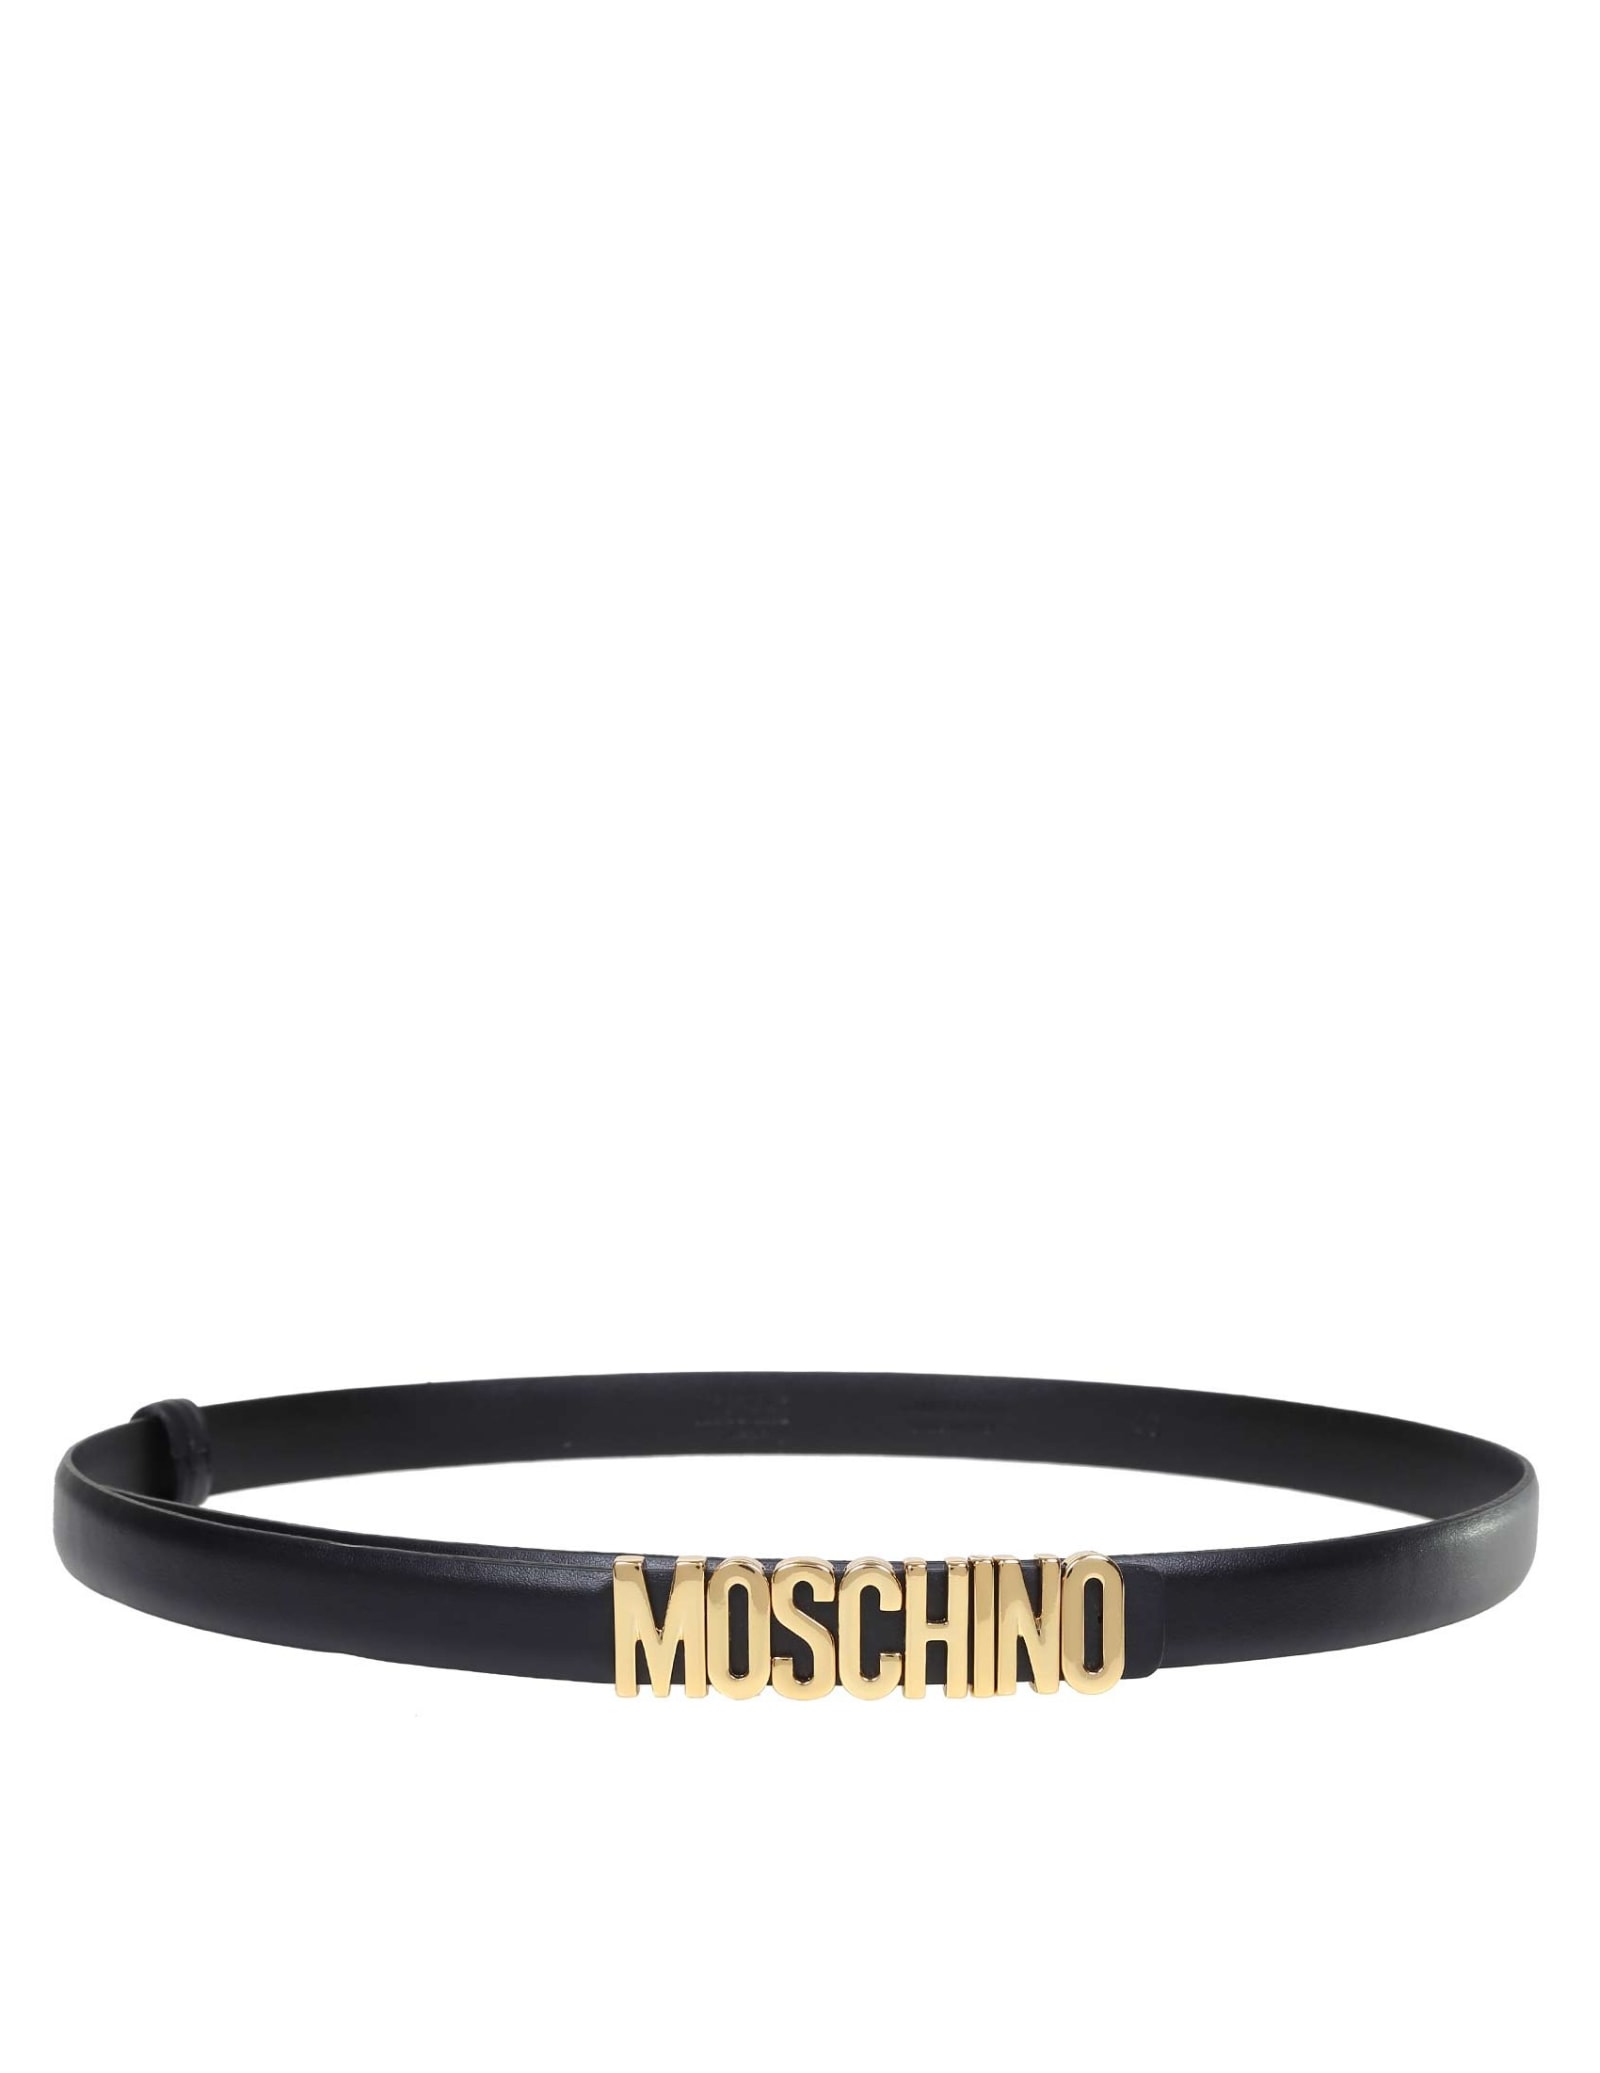 MOSCHINO BELT WITH GOLD LETTERING MINI LOGO